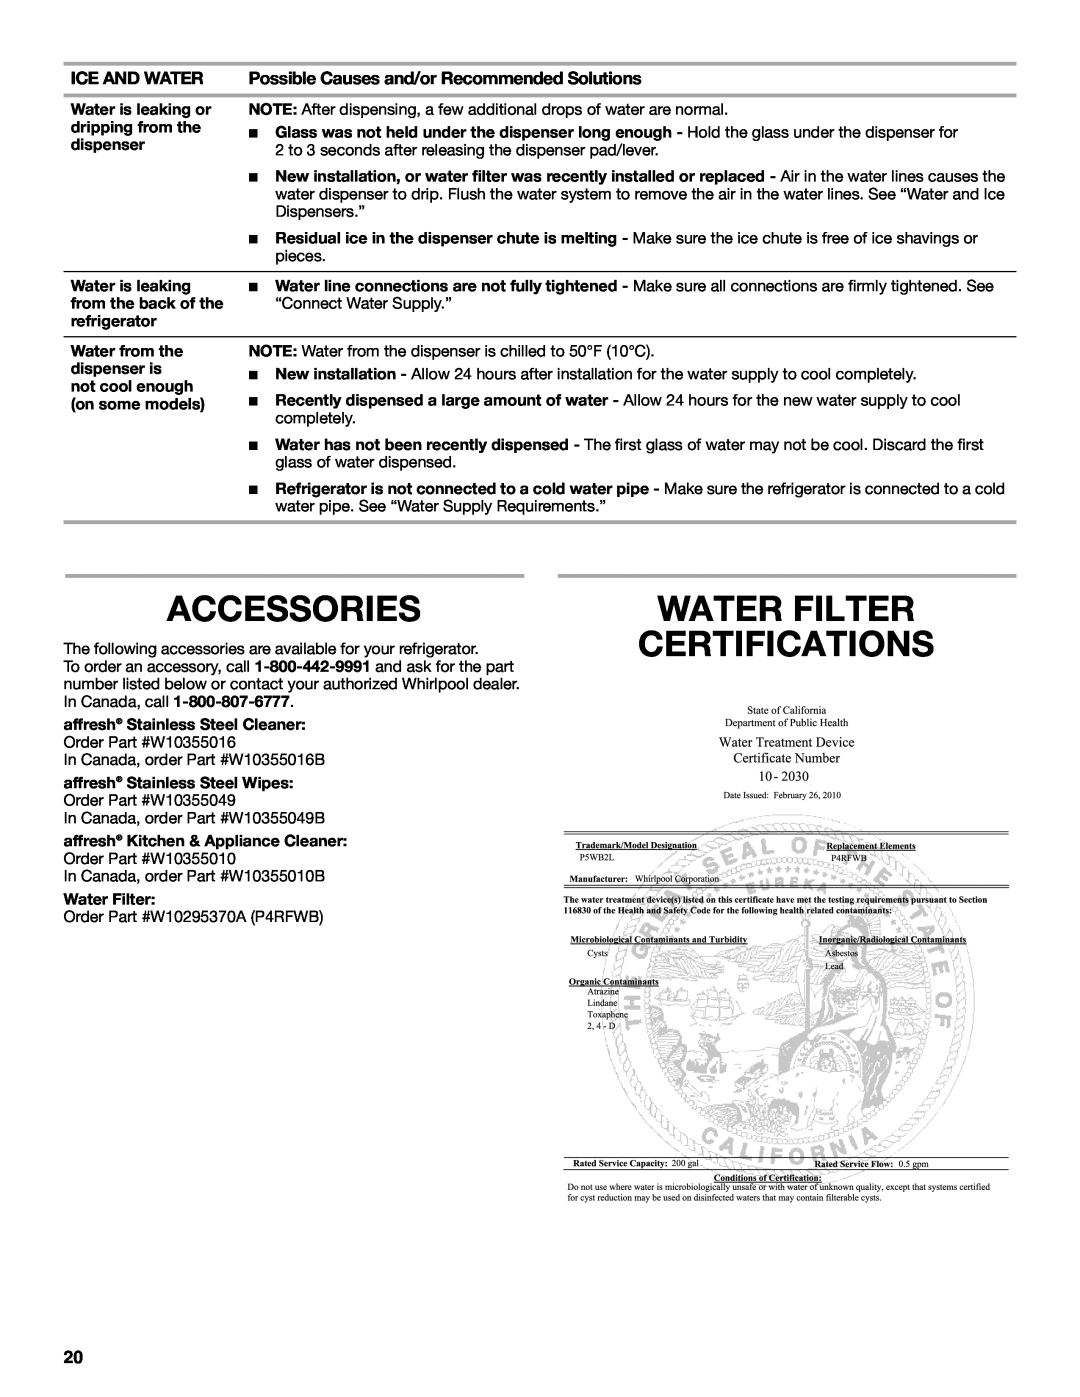 Whirlpool ED2KHAXVB Accessories, Water Filter Certifications, Ice And Water, Possible Causes and/or Recommended Solutions 